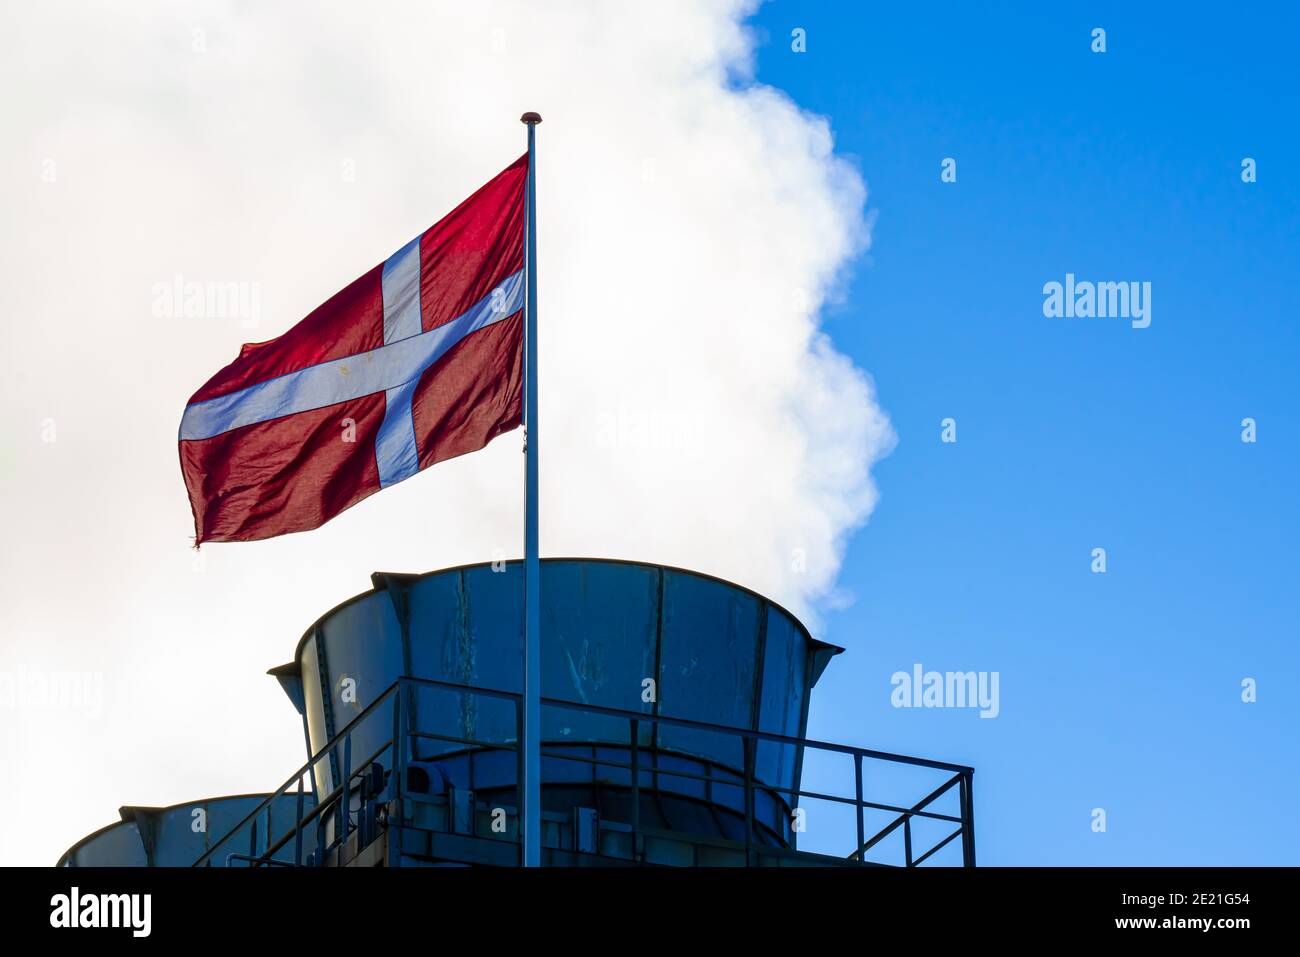 Smokestack with steam and smoke and a Danish flag in the foreground. Stock Photo